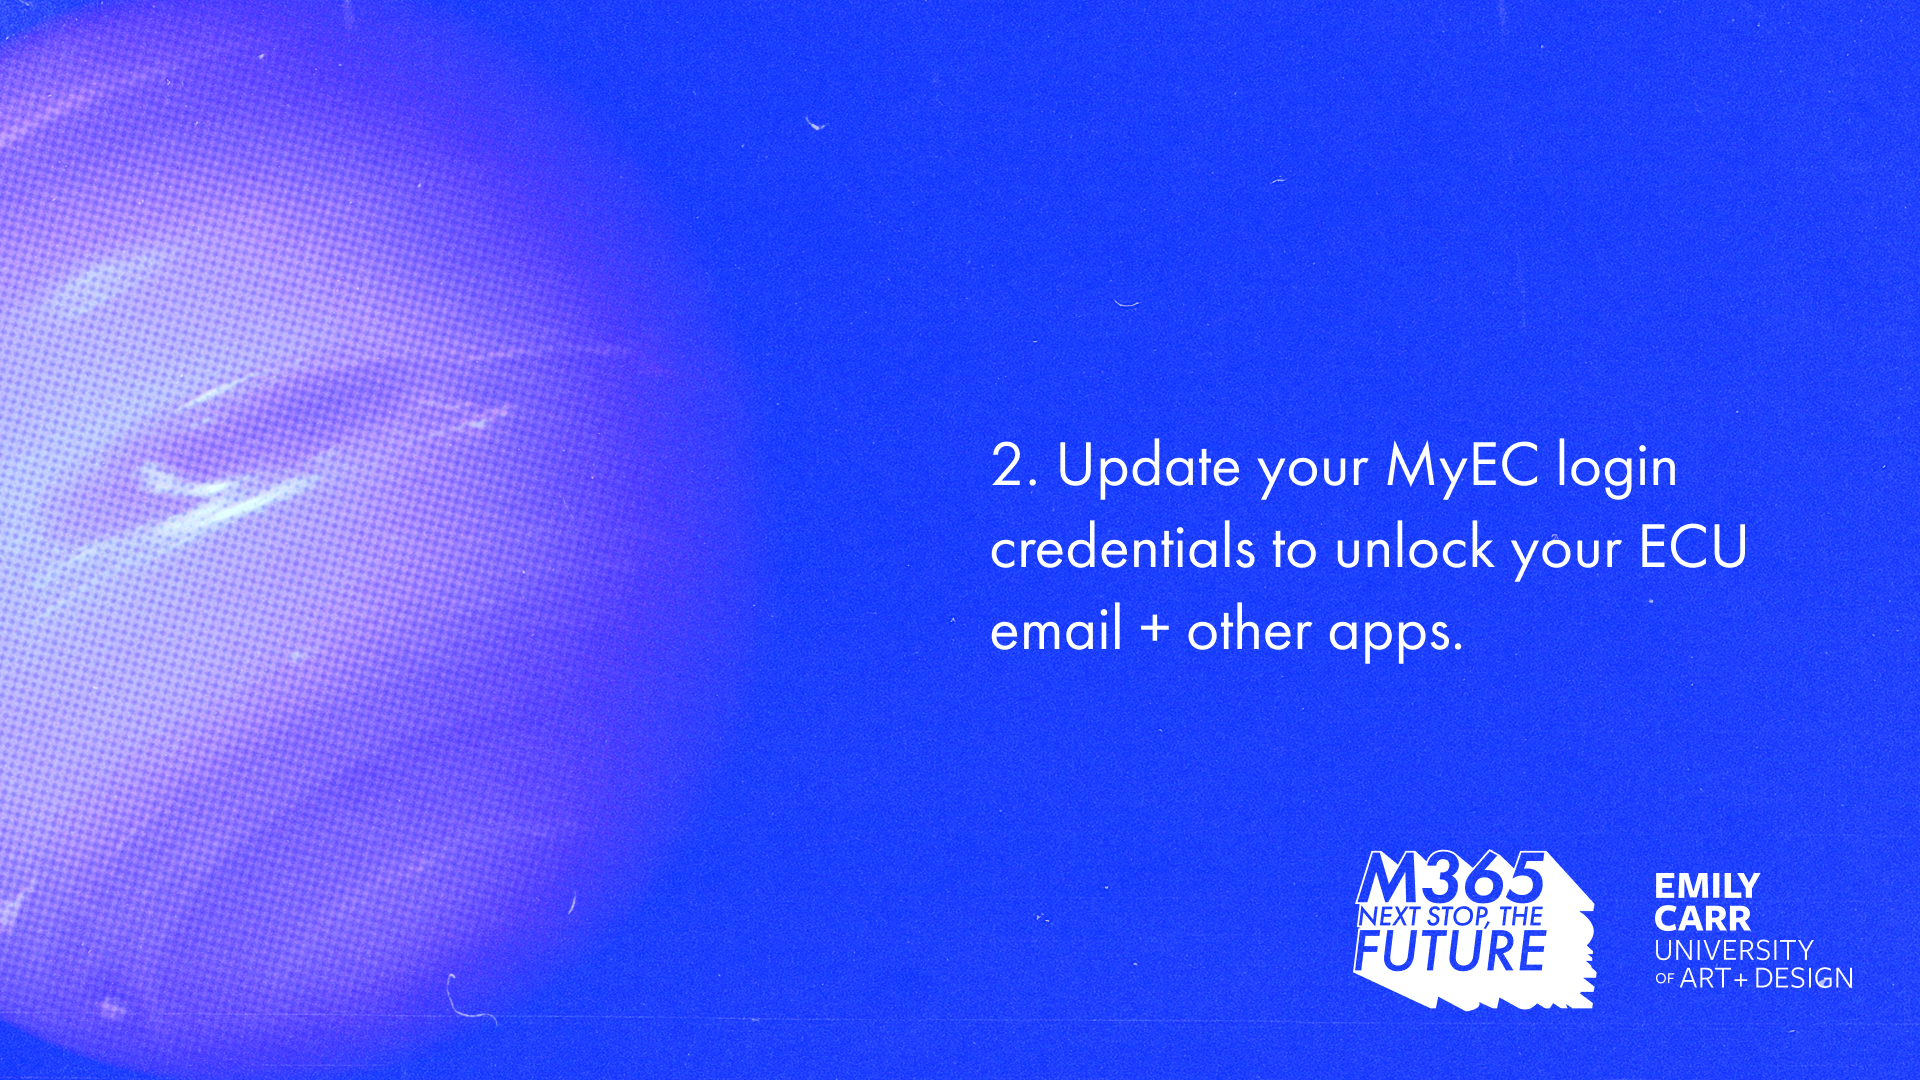 Text reads, "Update your MyEC login credentials to unlock your ECU email + other apps.